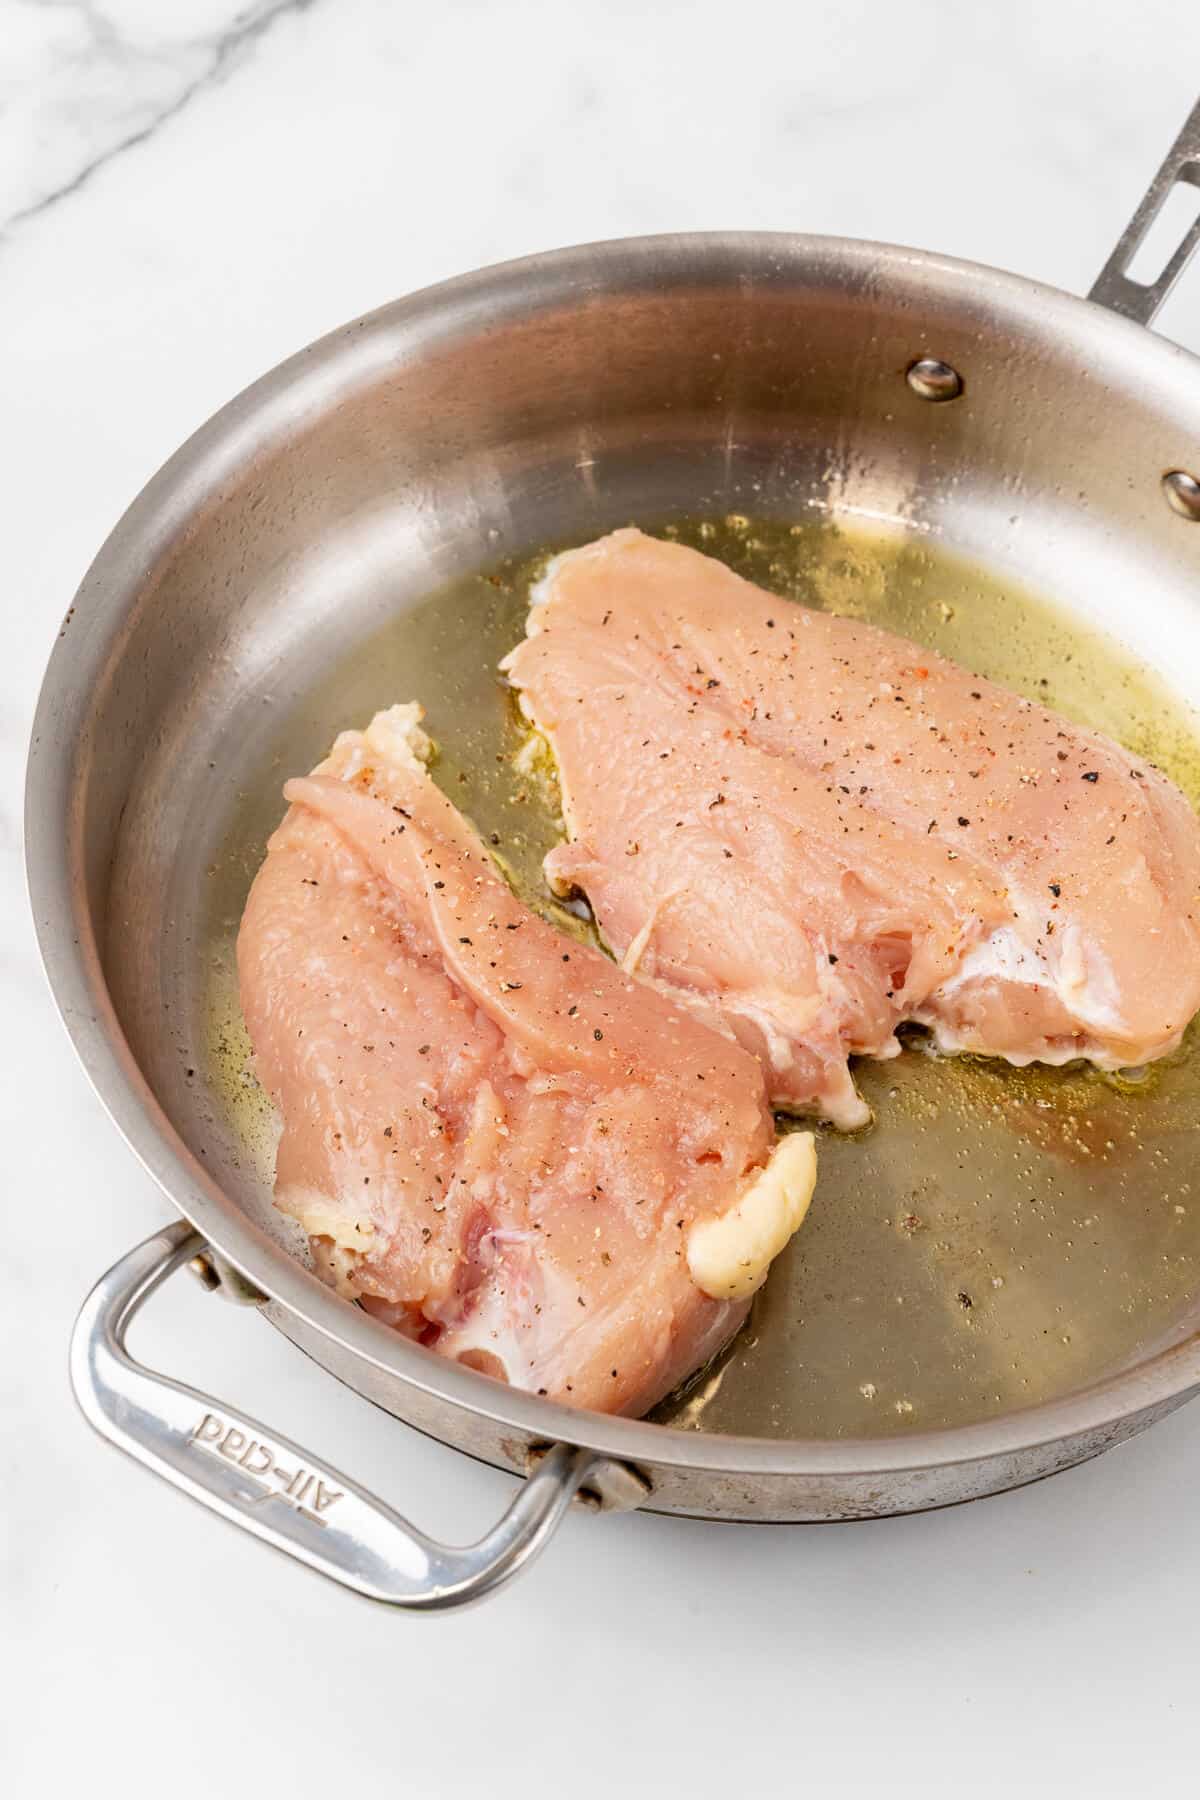 Two chicken breasts being sautéed in a stainless steel pan.